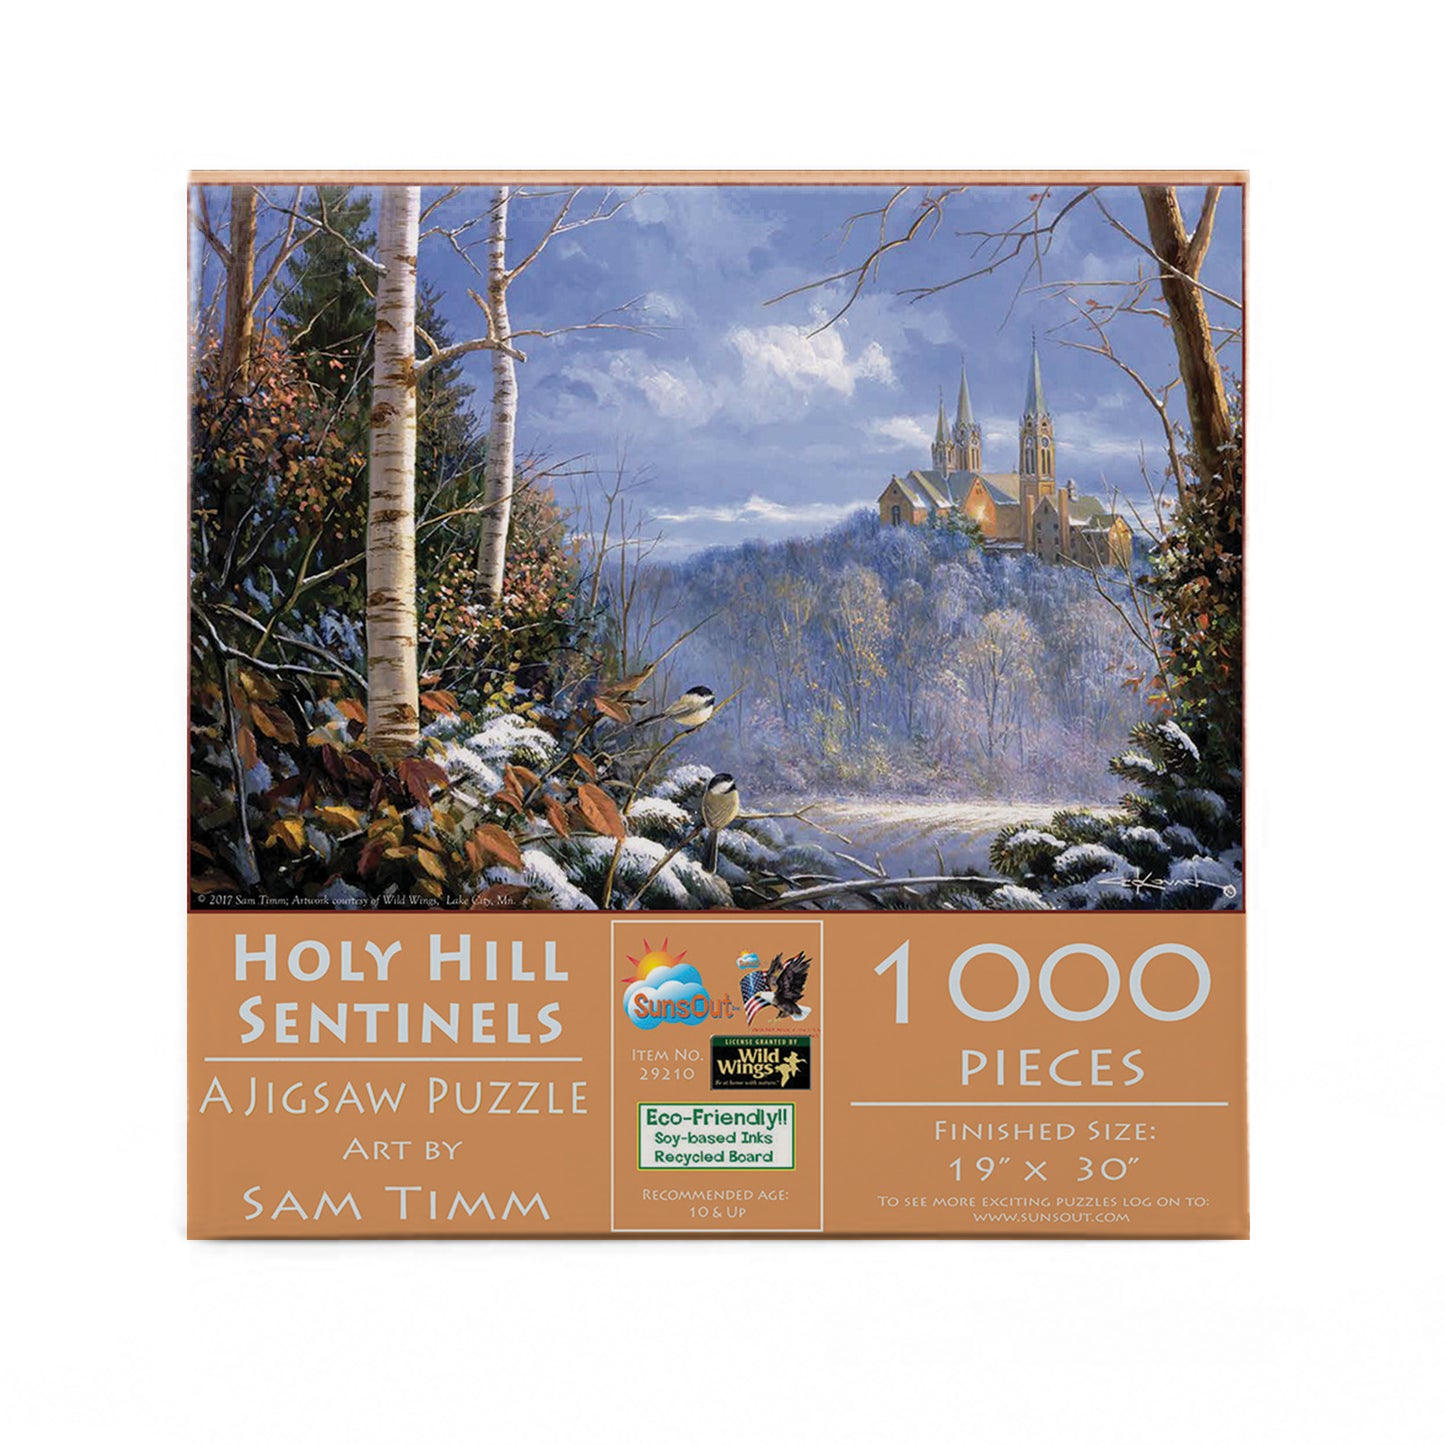 Holy Hill Sentinels - 1000 Piece Jigsaw Puzzle